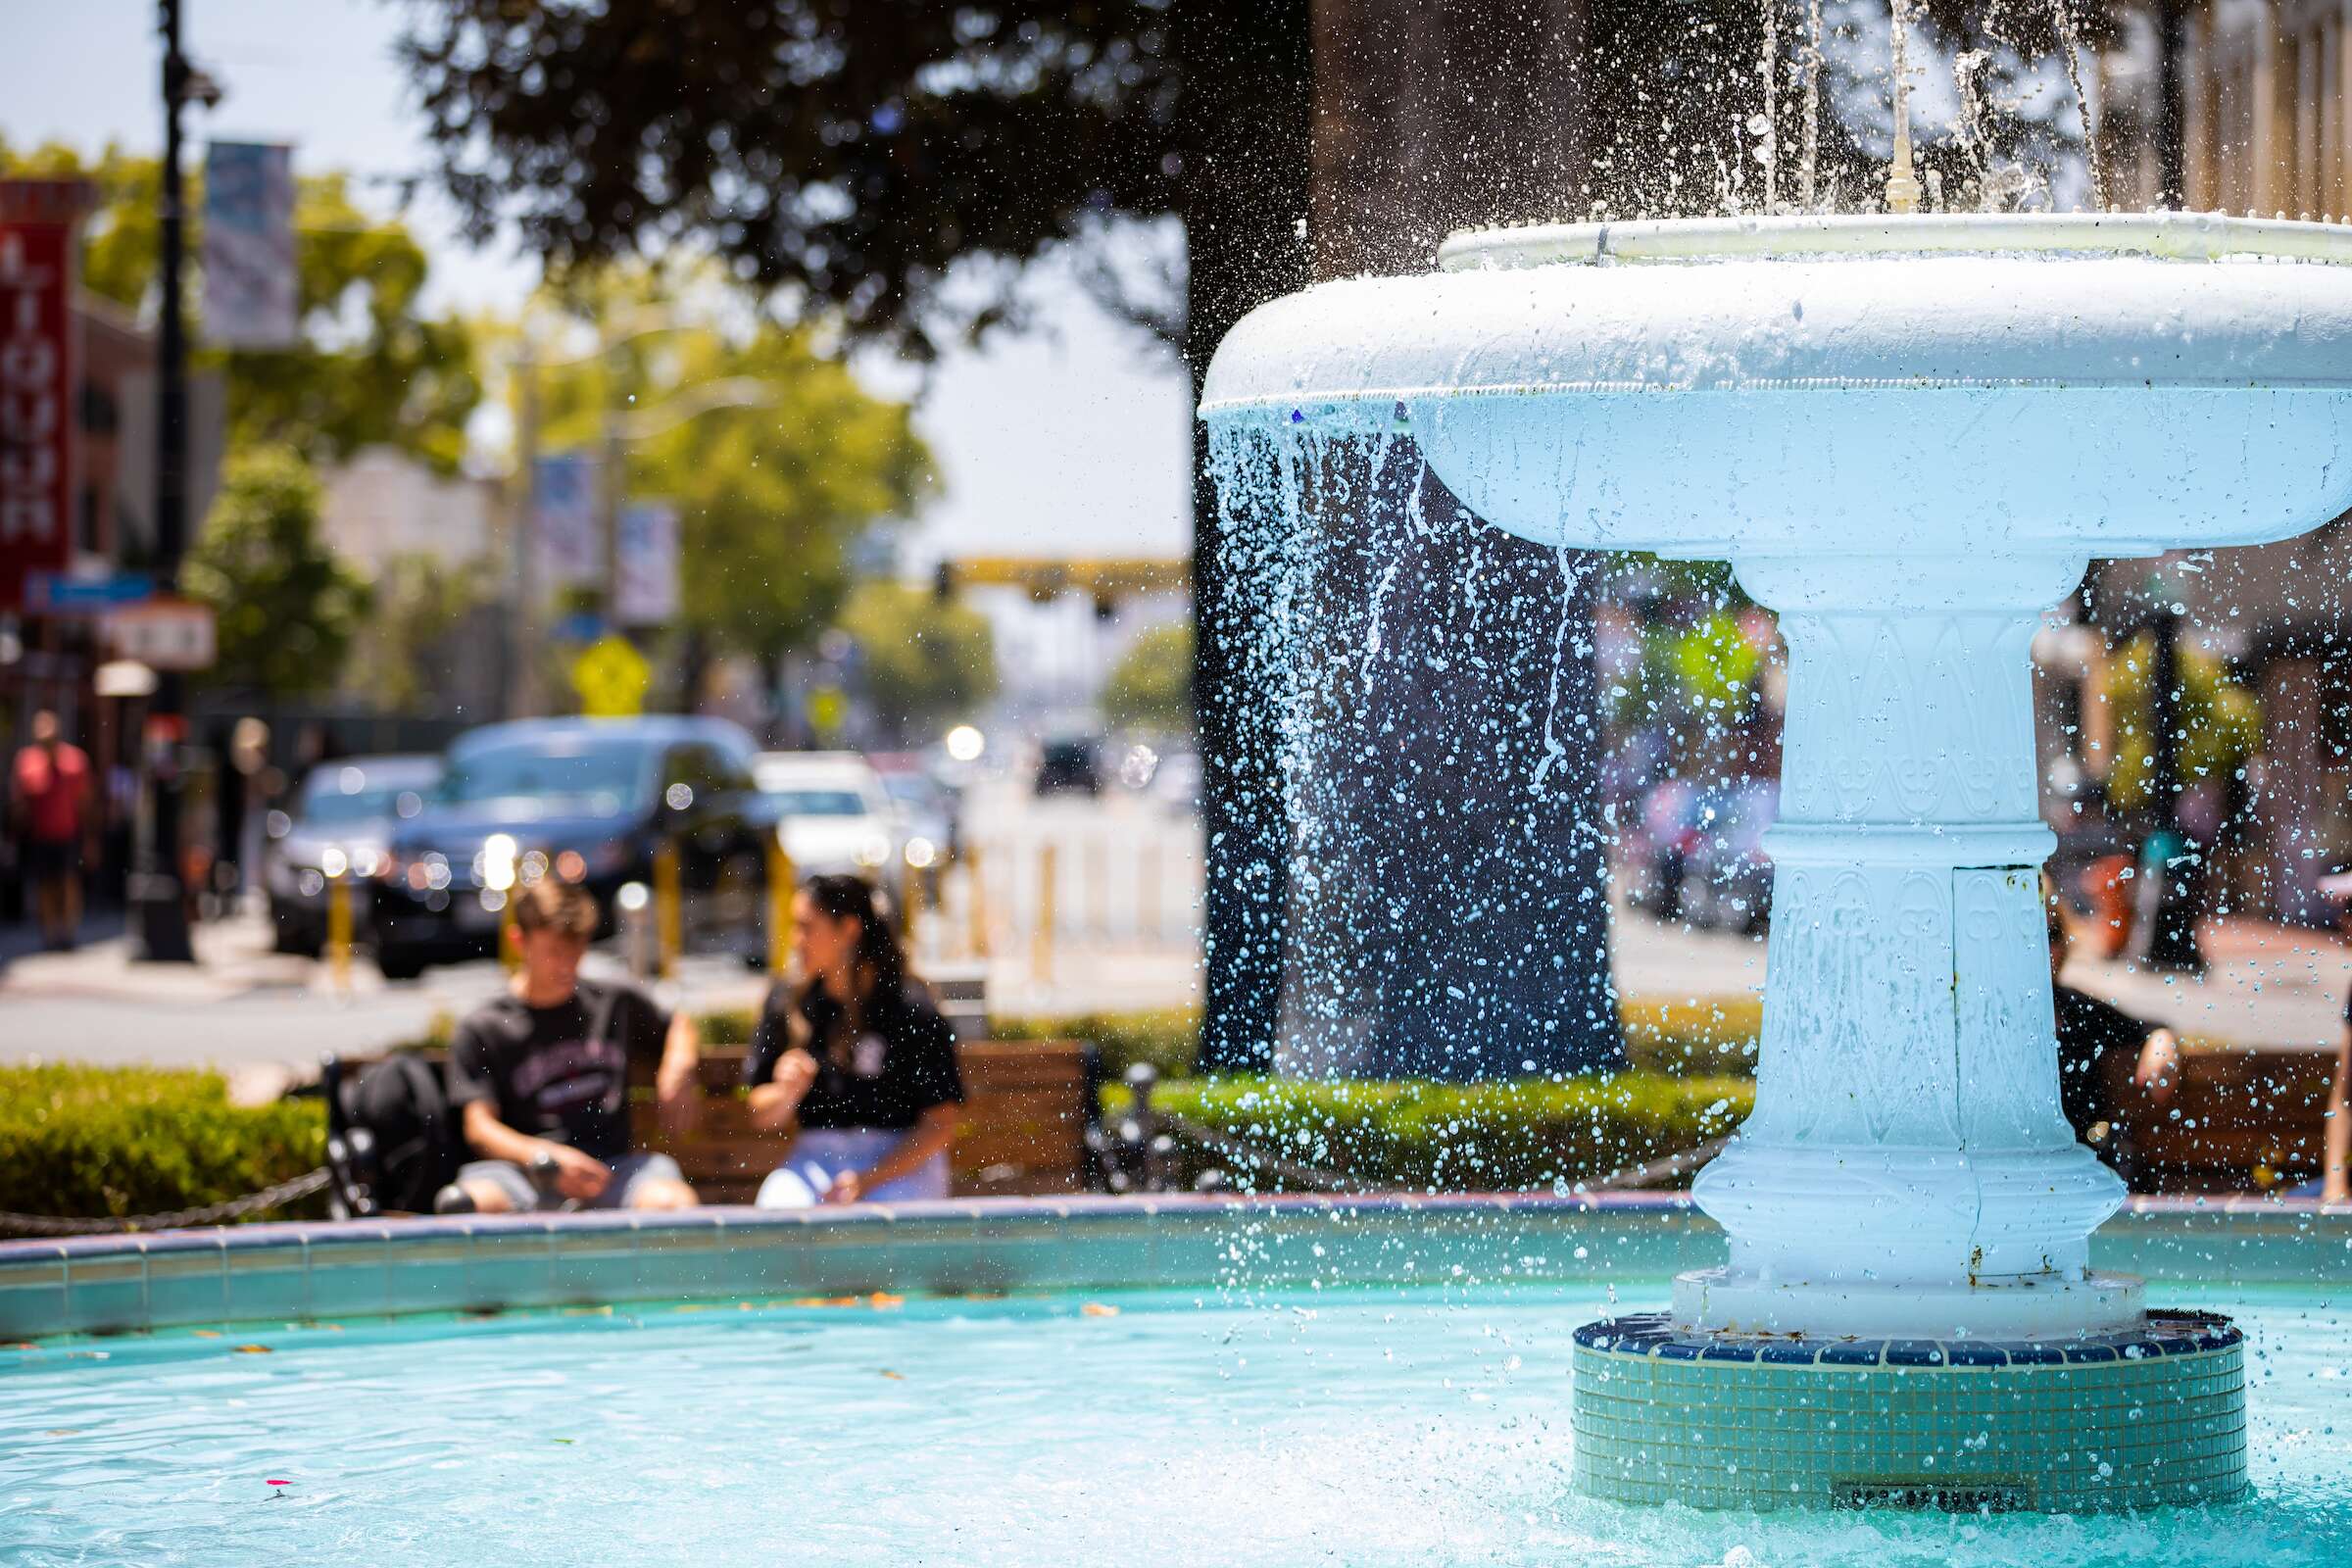 A fountain in the Orange Circle on a sunny day.